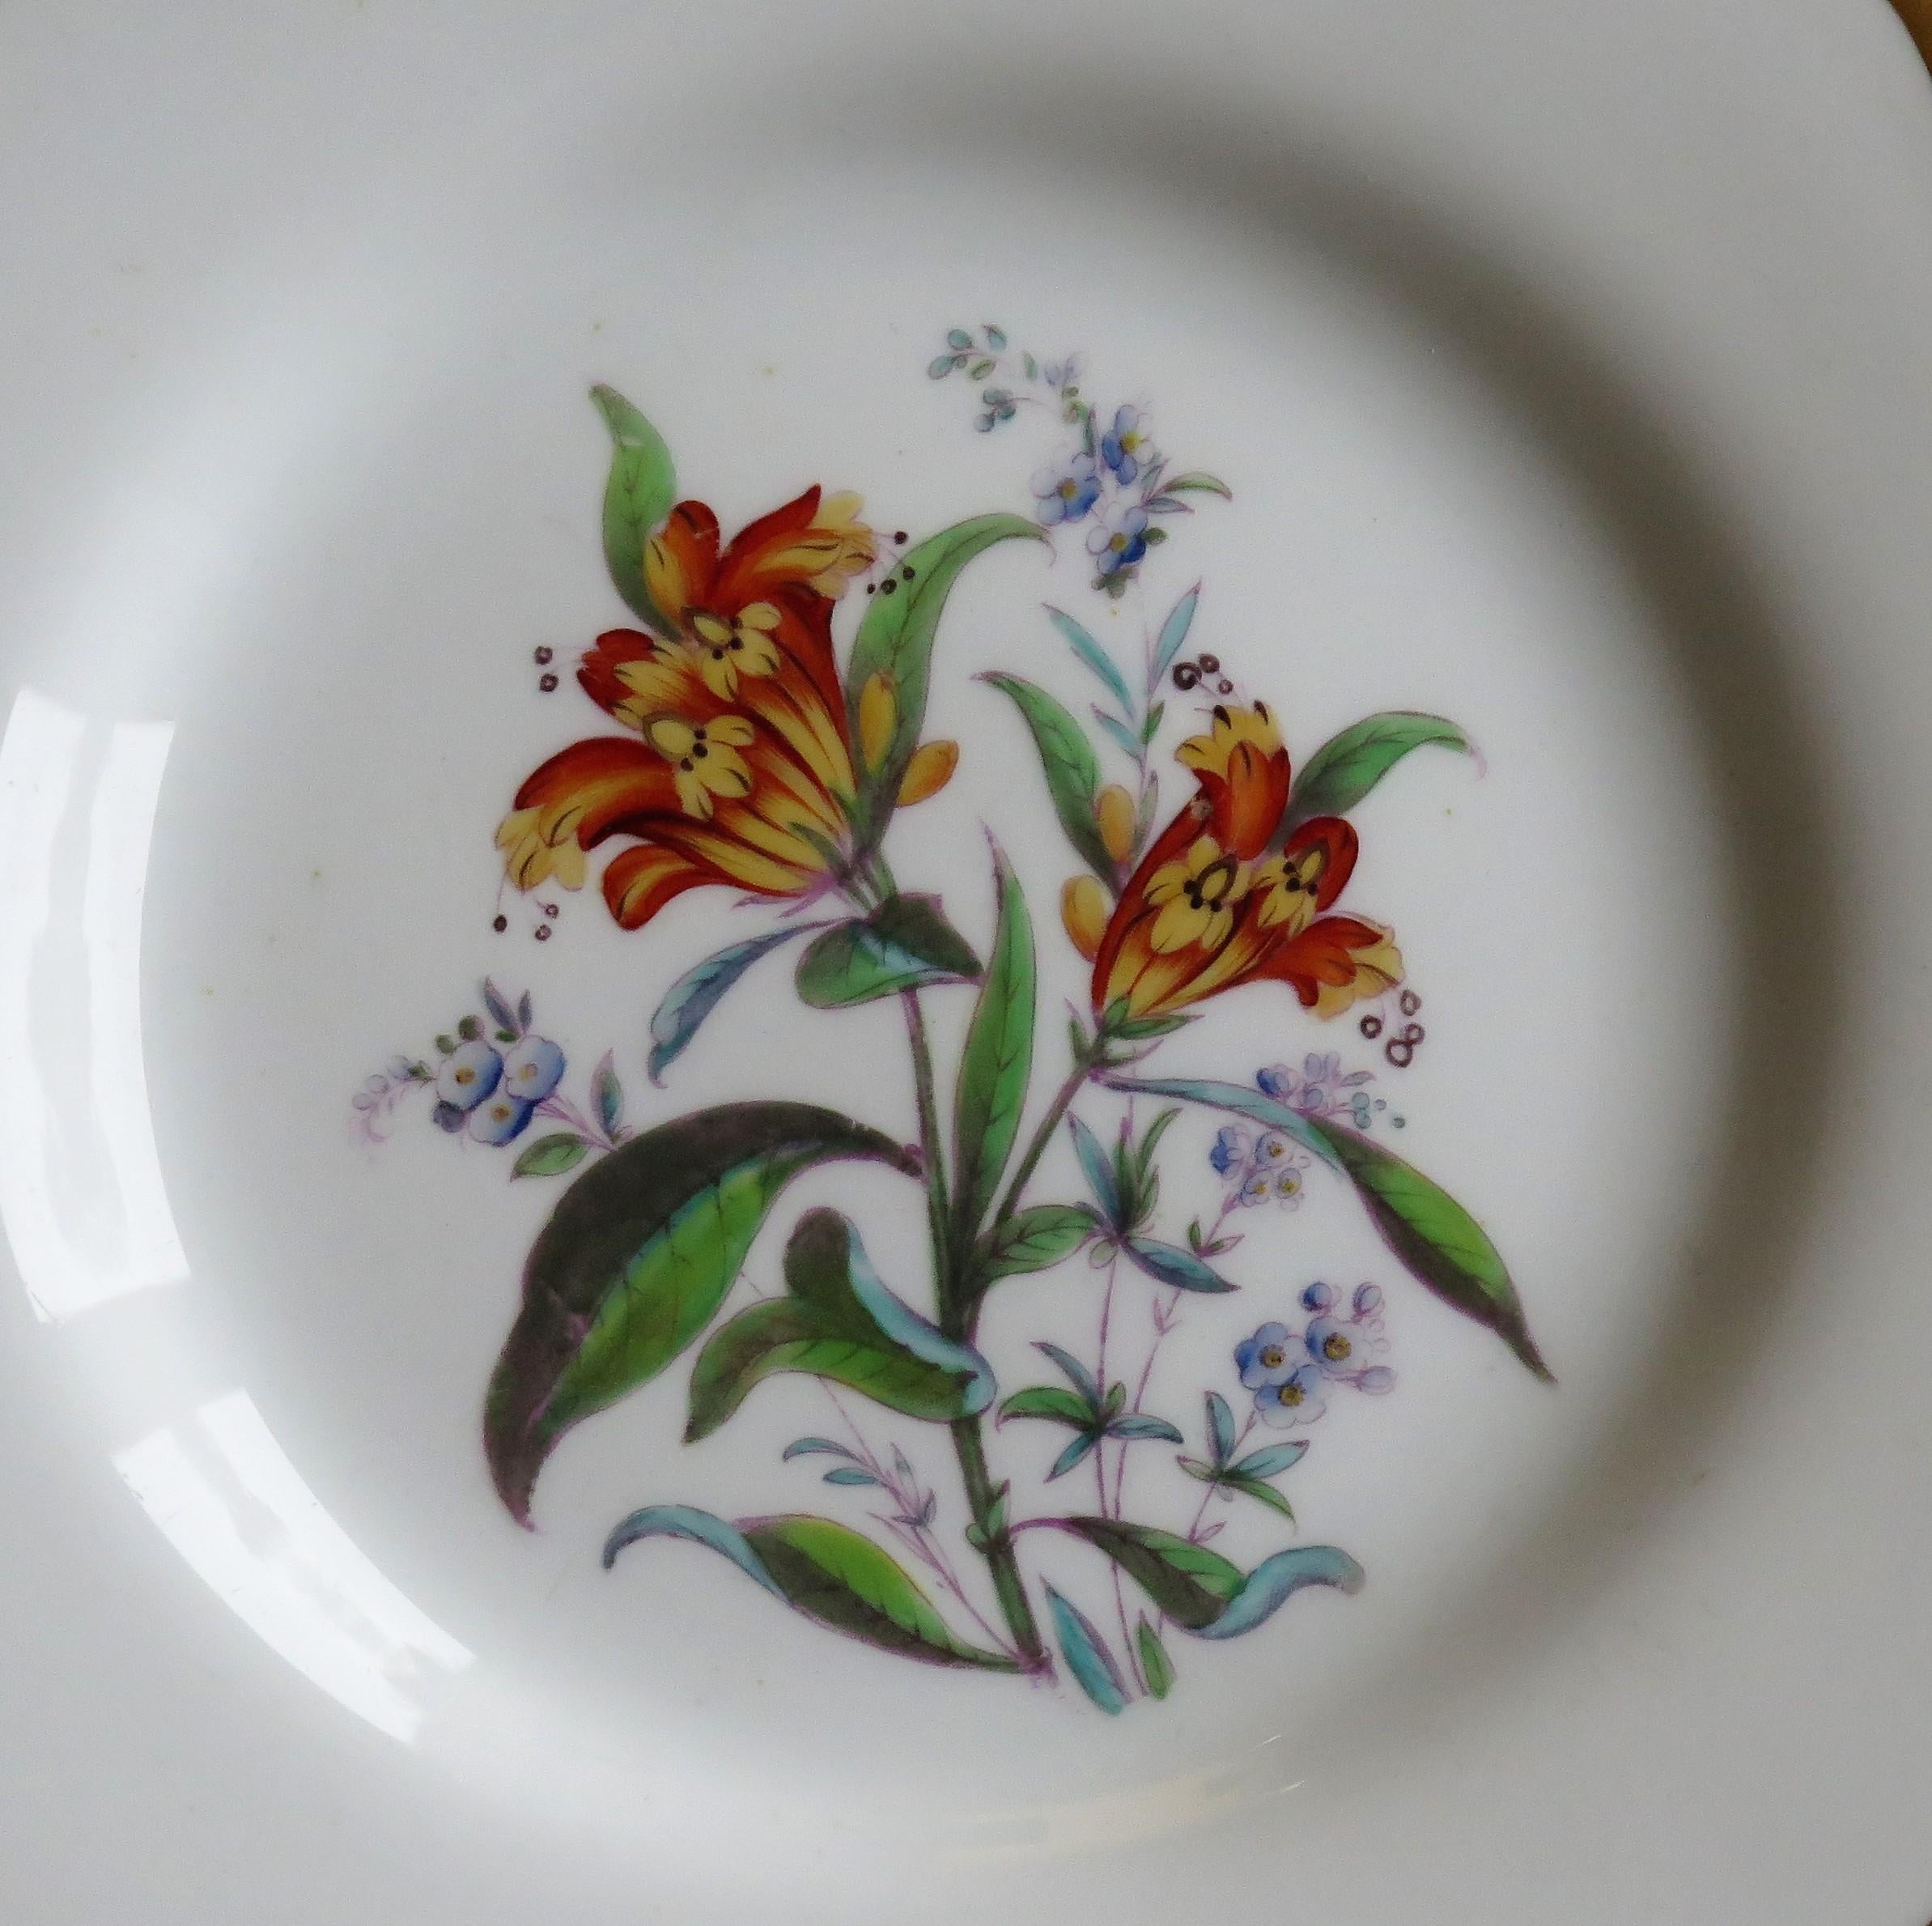 This is a beautiful pair of very decorative, Porcelain Botanical plates by John Ridgway, of Shelton, Hanley, Staffordshire Potteries, England, dating to the William IVth period of the early 19th century, circa 1830.

The plates are circular with a